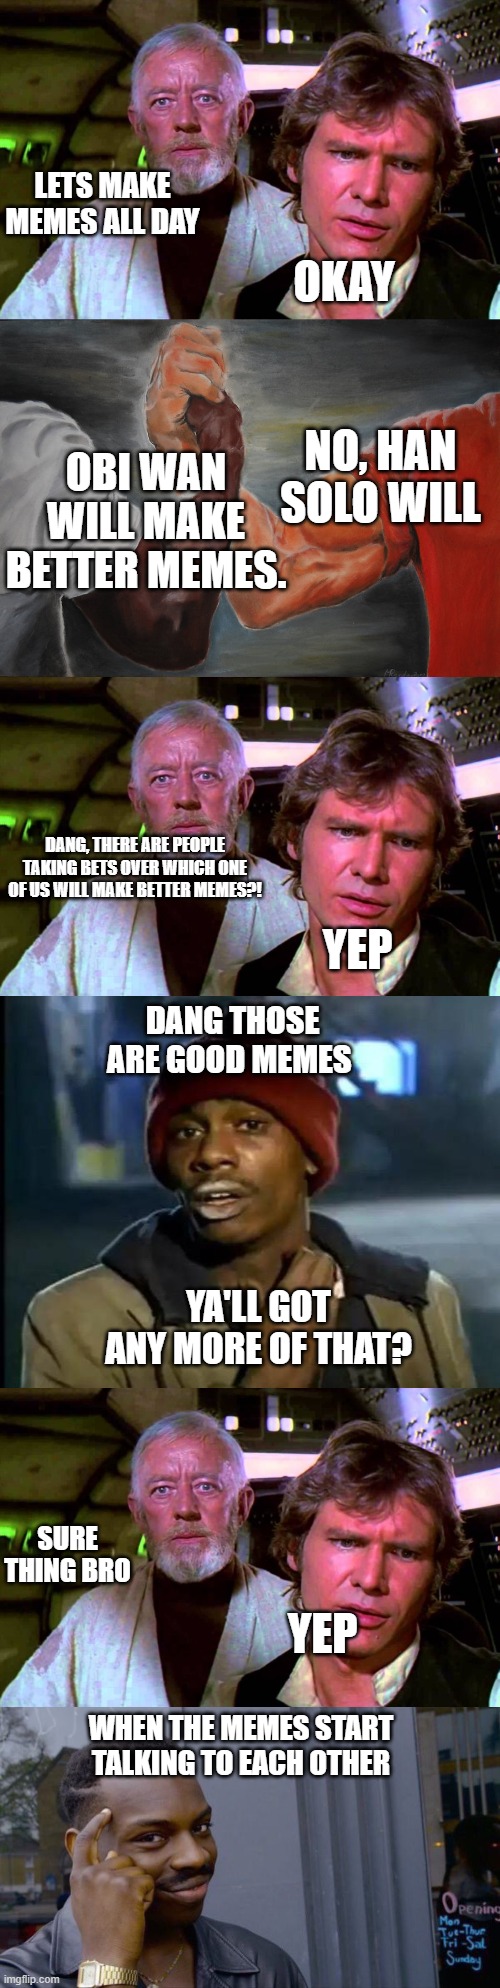 The Memeversation | LETS MAKE MEMES ALL DAY; OKAY; NO, HAN SOLO WILL; OBI WAN WILL MAKE BETTER MEMES. DANG, THERE ARE PEOPLE TAKING BETS OVER WHICH ONE OF US WILL MAKE BETTER MEMES?! YEP; DANG THOSE ARE GOOD MEMES; YA'LL GOT ANY MORE OF THAT? SURE THING BRO; YEP; WHEN THE MEMES START TALKING TO EACH OTHER | image tagged in obi wan that's no moon,memes,epic handshake,y'all got any more of that,roll safe think about it | made w/ Imgflip meme maker